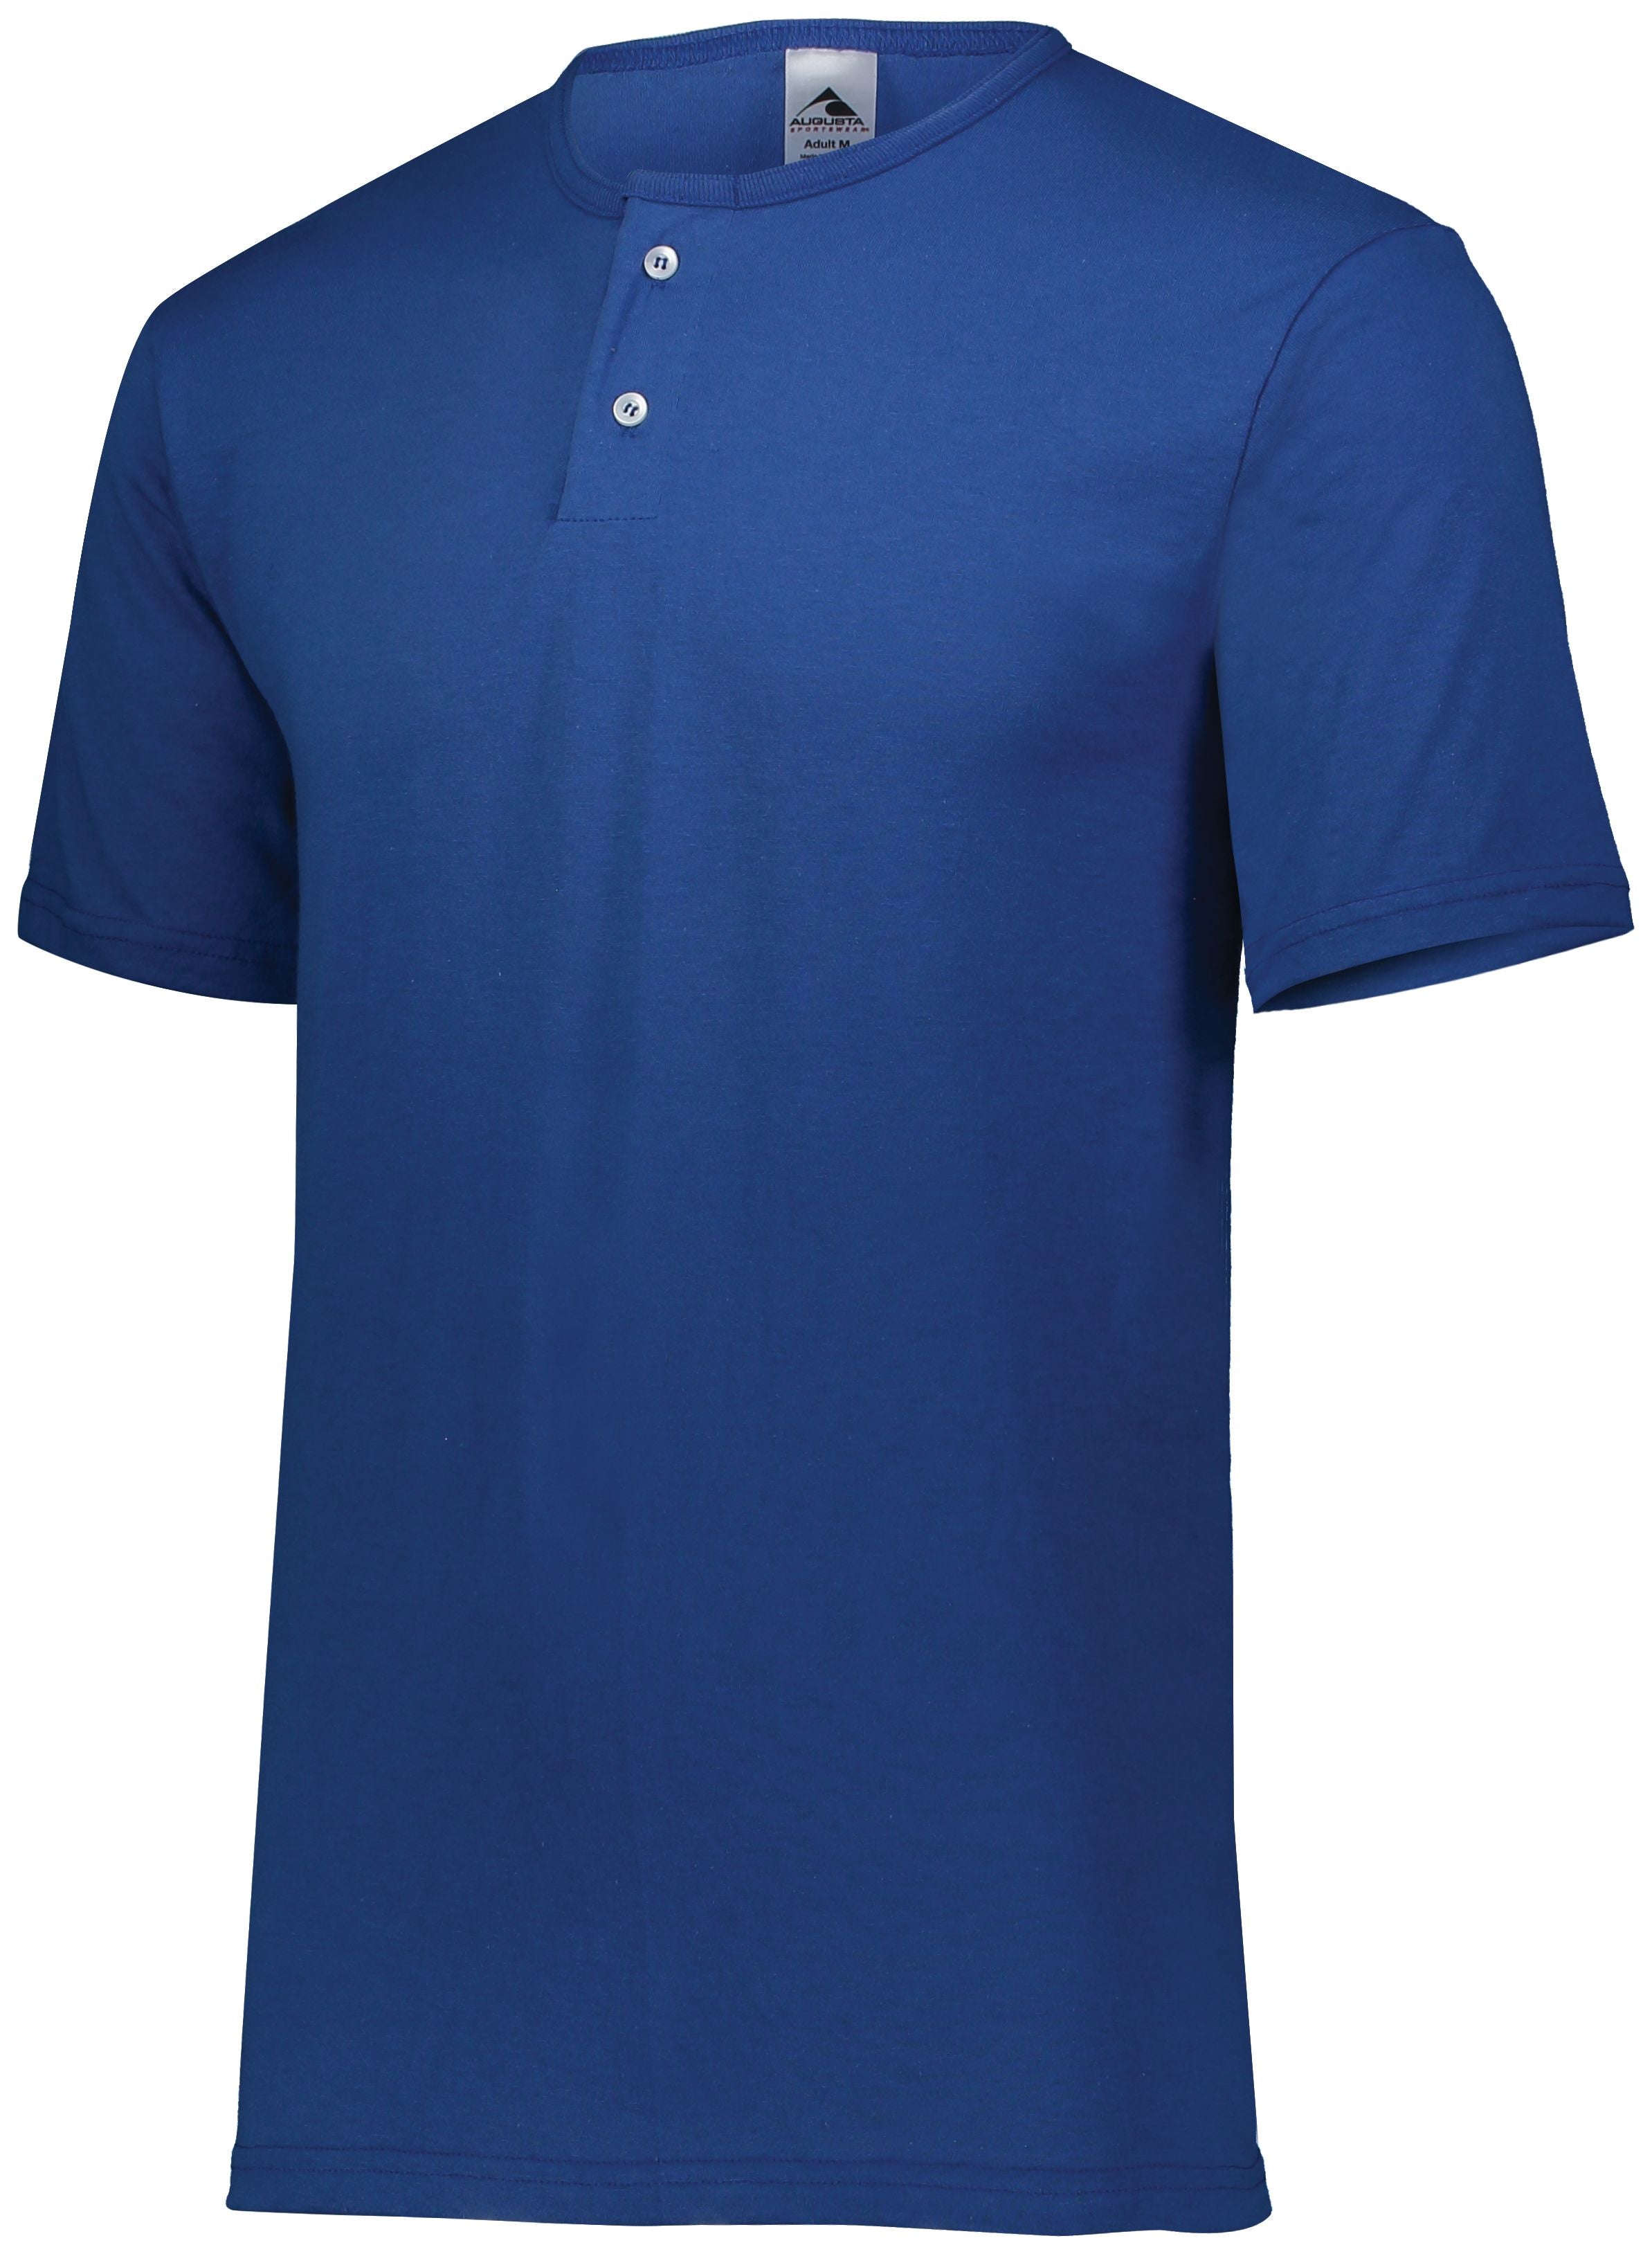 Augusta Sportswear Two-Button Baseball Jersey in Royal  -Part of the Adult, Adult-Jersey, Augusta-Products, Baseball, Shirts, All-Sports, All-Sports-1 product lines at KanaleyCreations.com